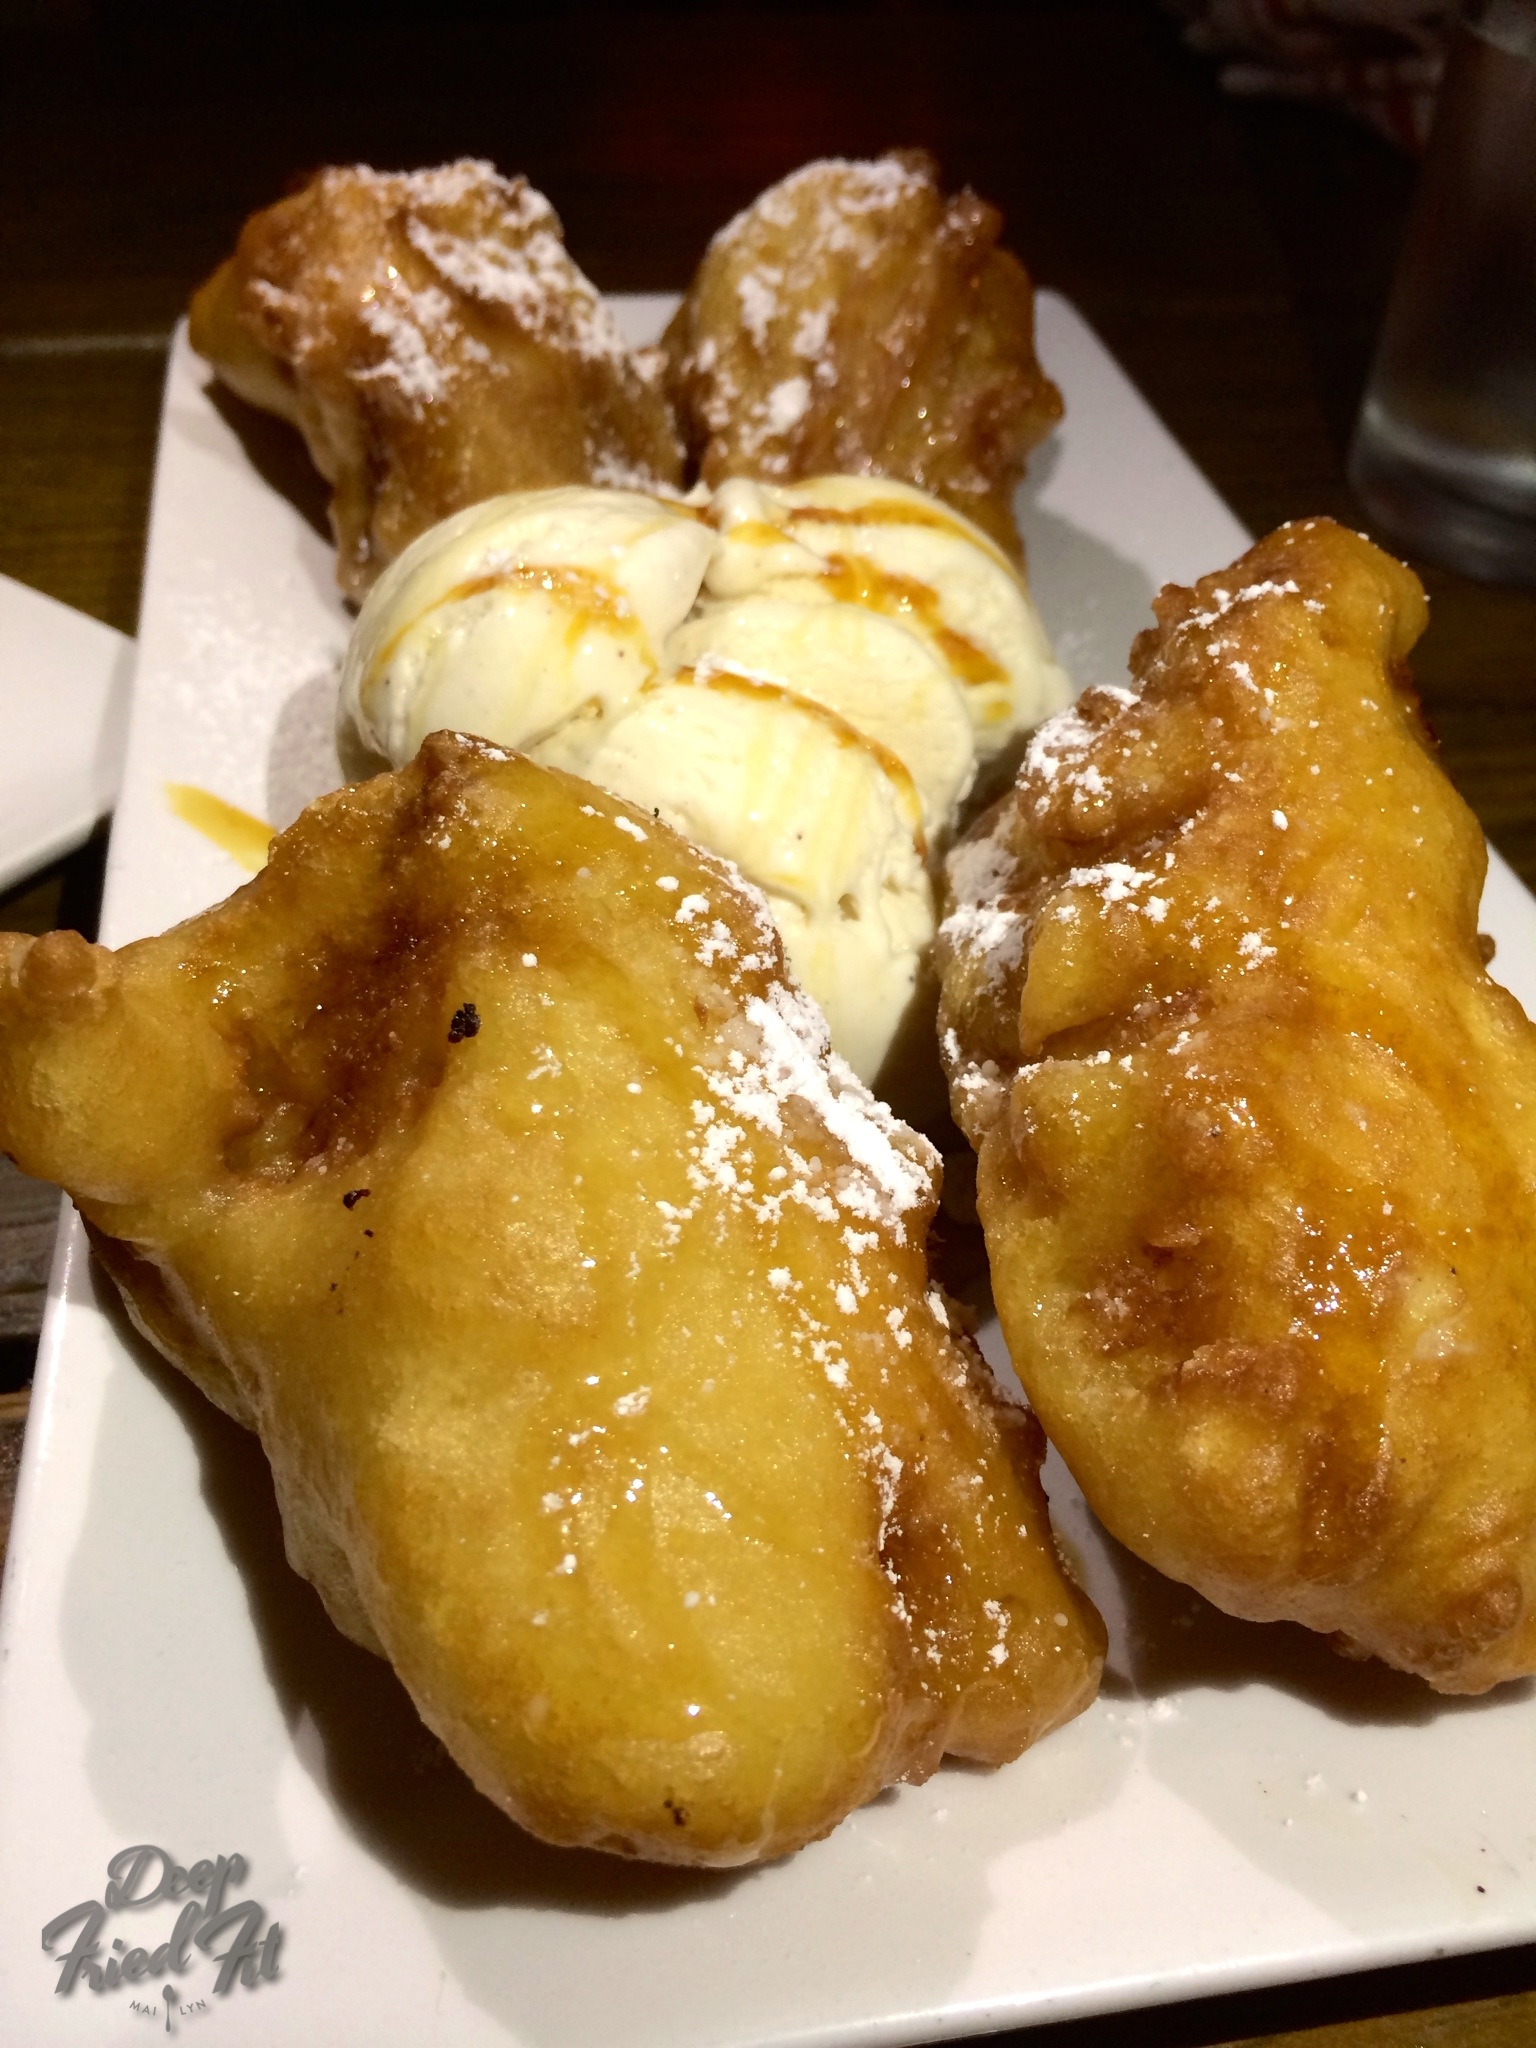 Banana foster beignets with banana ice cream. Mouthwatering.